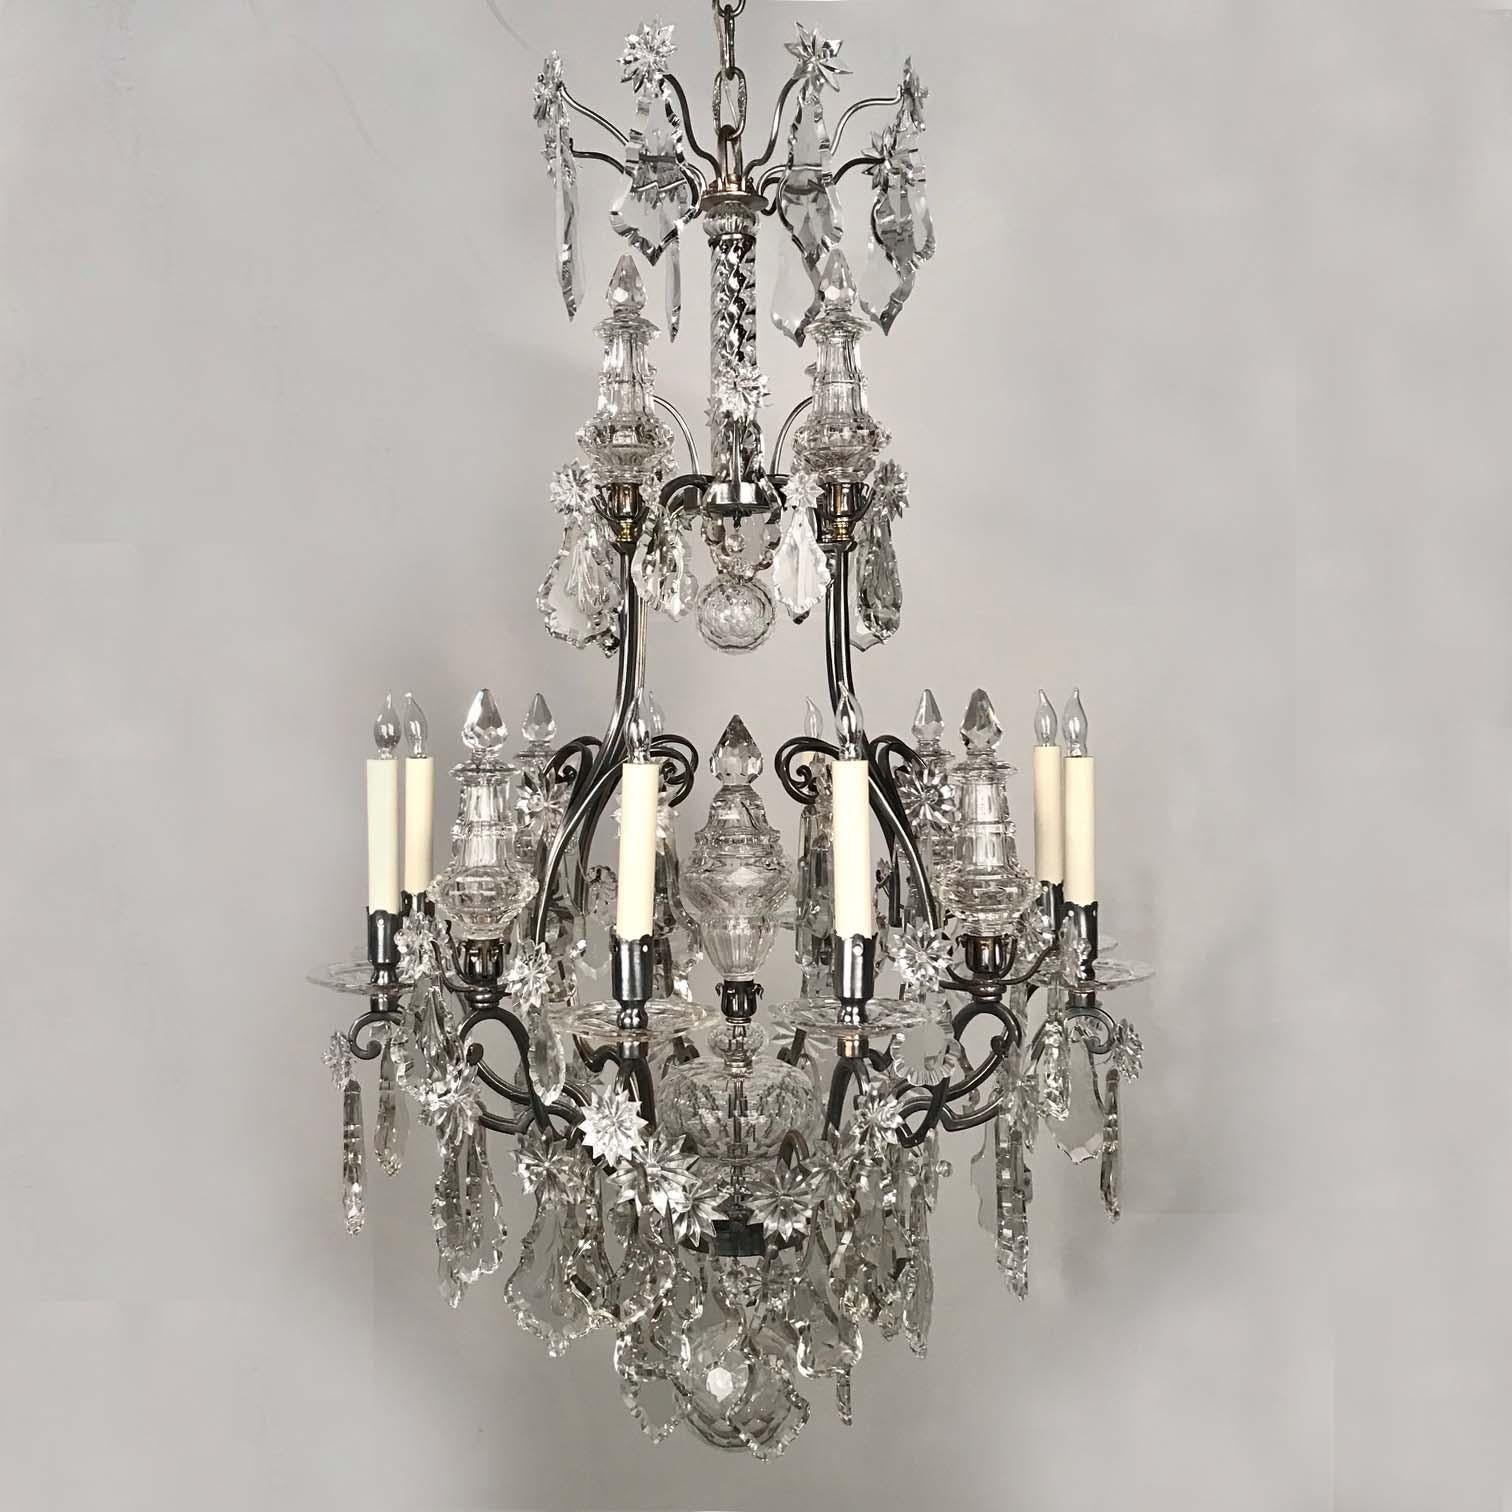 This elegant and high quality chandelier adds an atmosphere of shimmering and delicate illumination wherever it is hung. It is simply yet powerfully conceived. ....Eight-light, heavy cut spires, star shaped medallions and hefty beveled violin shaped